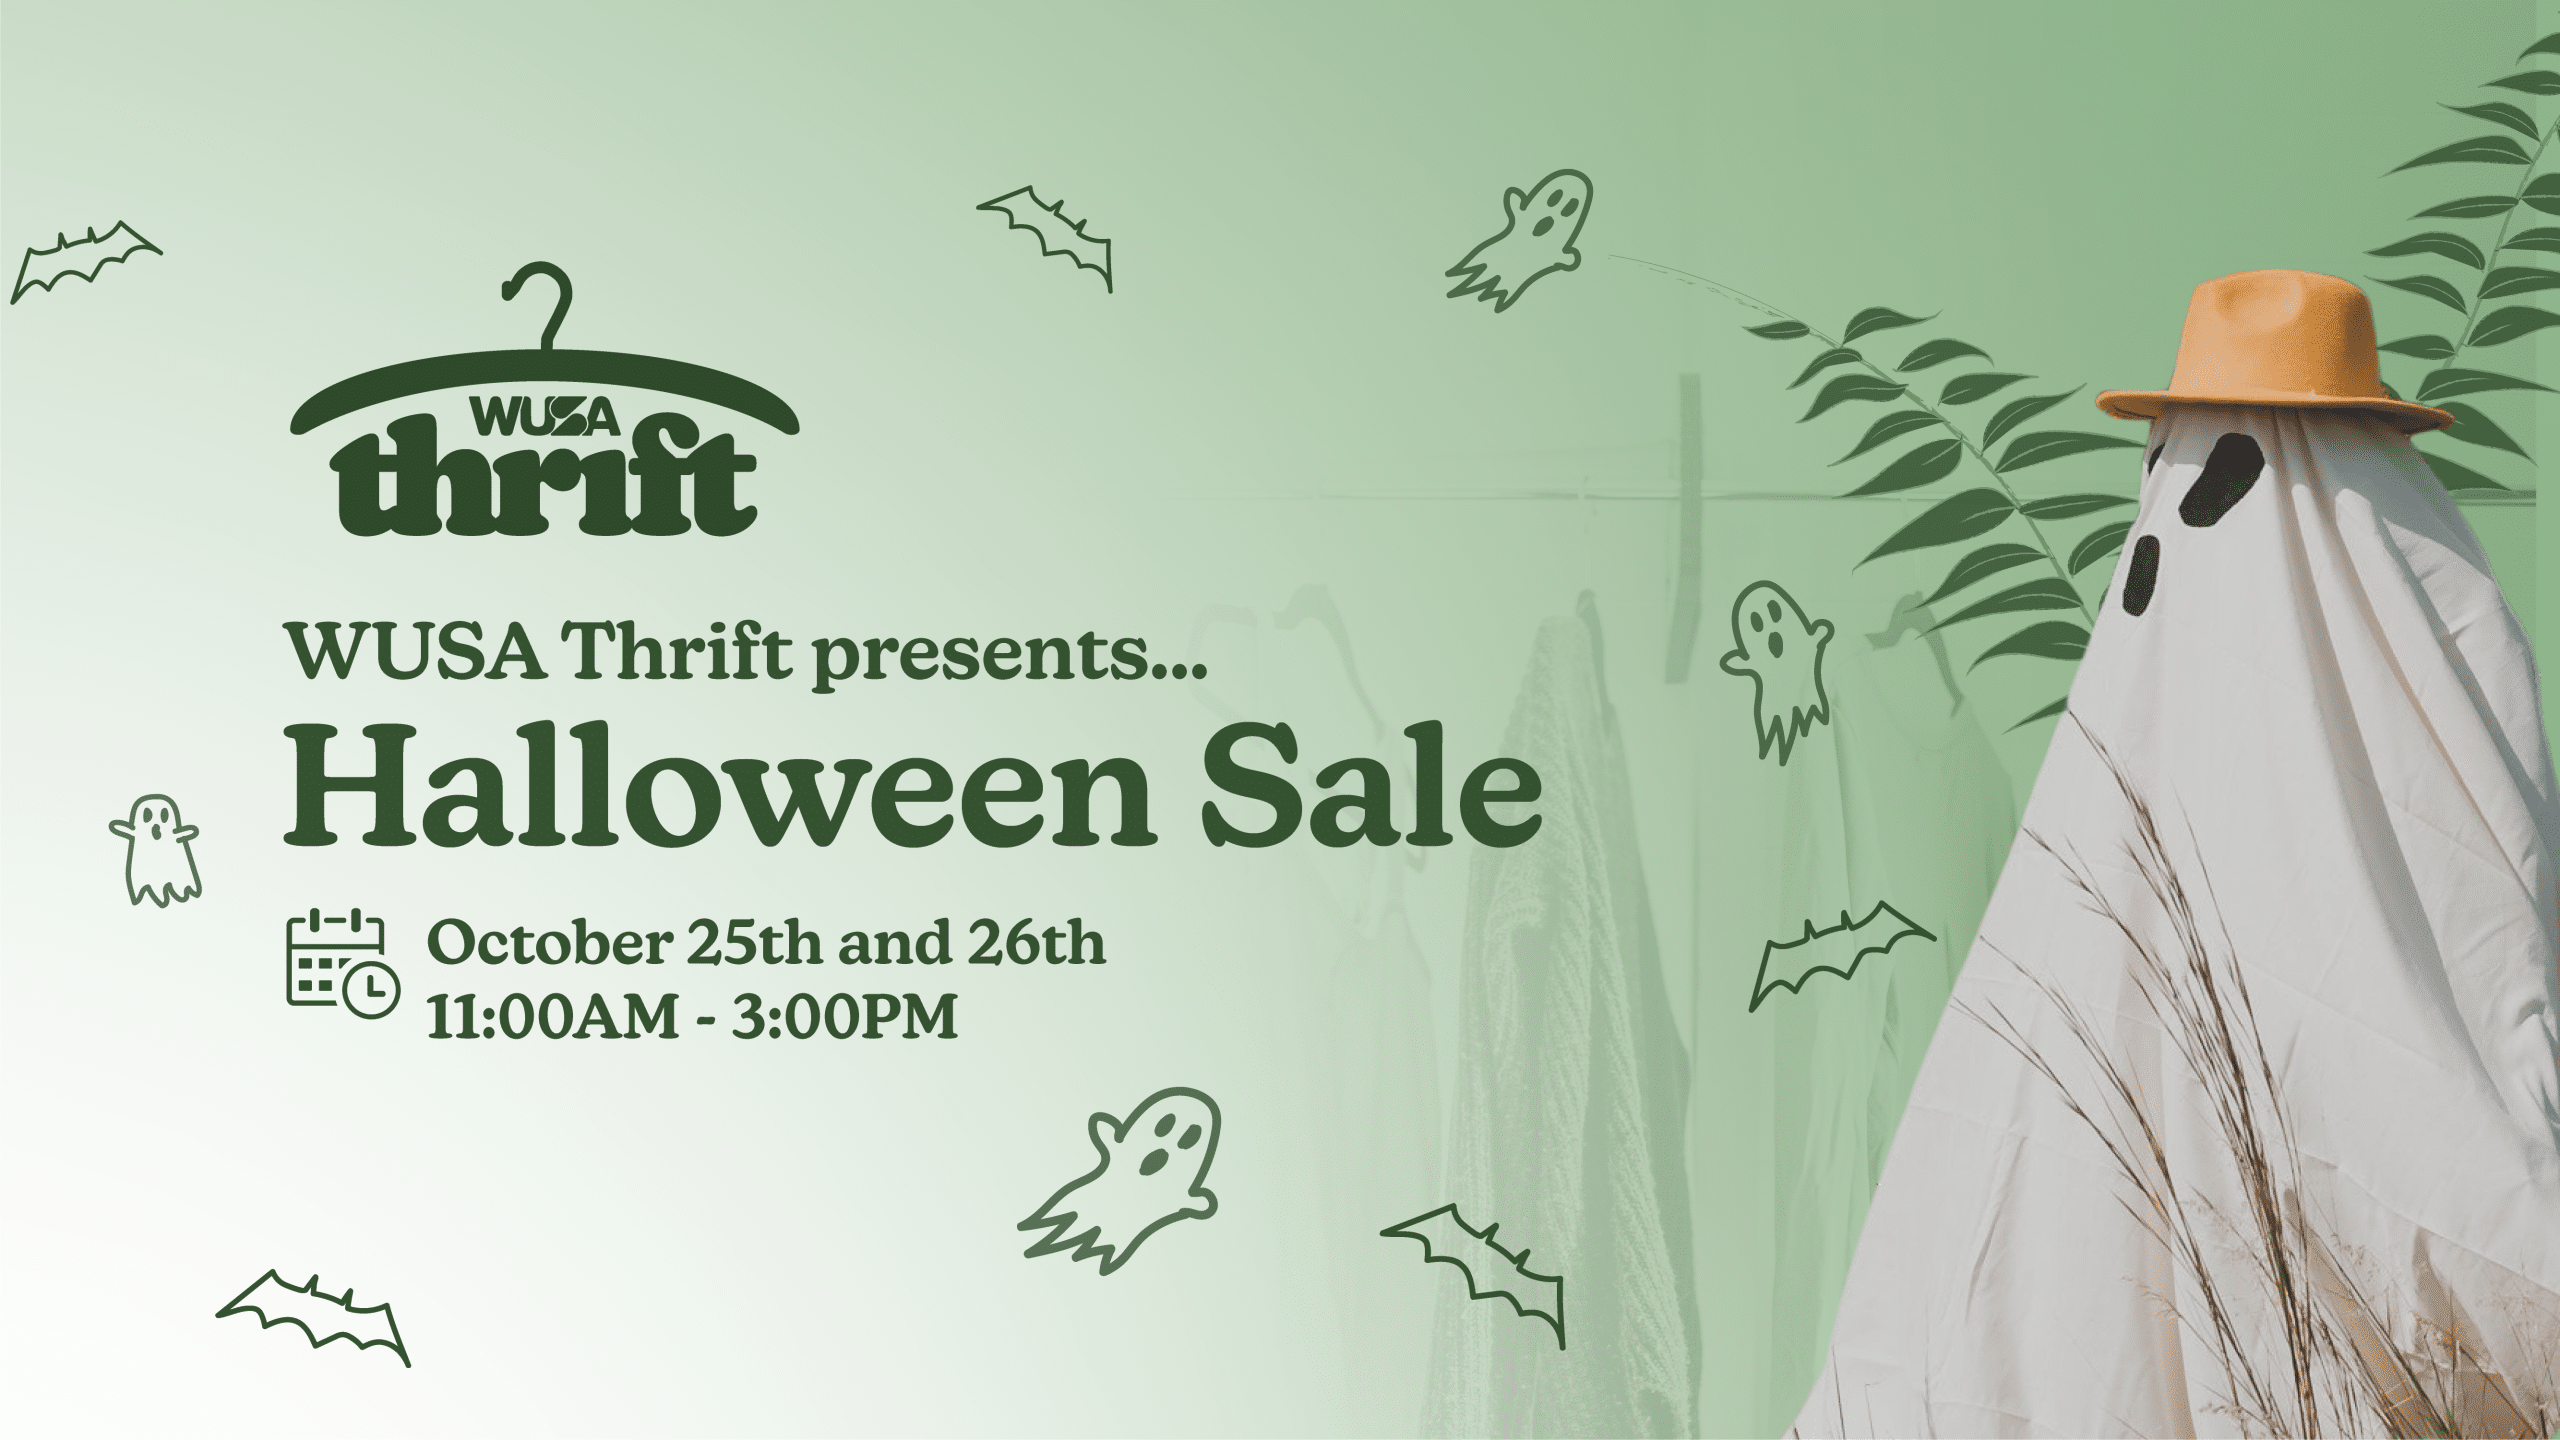 WUSA Thrift Presents Halloween Sale. October 25th and 26th, 11:00am - 3:00pm